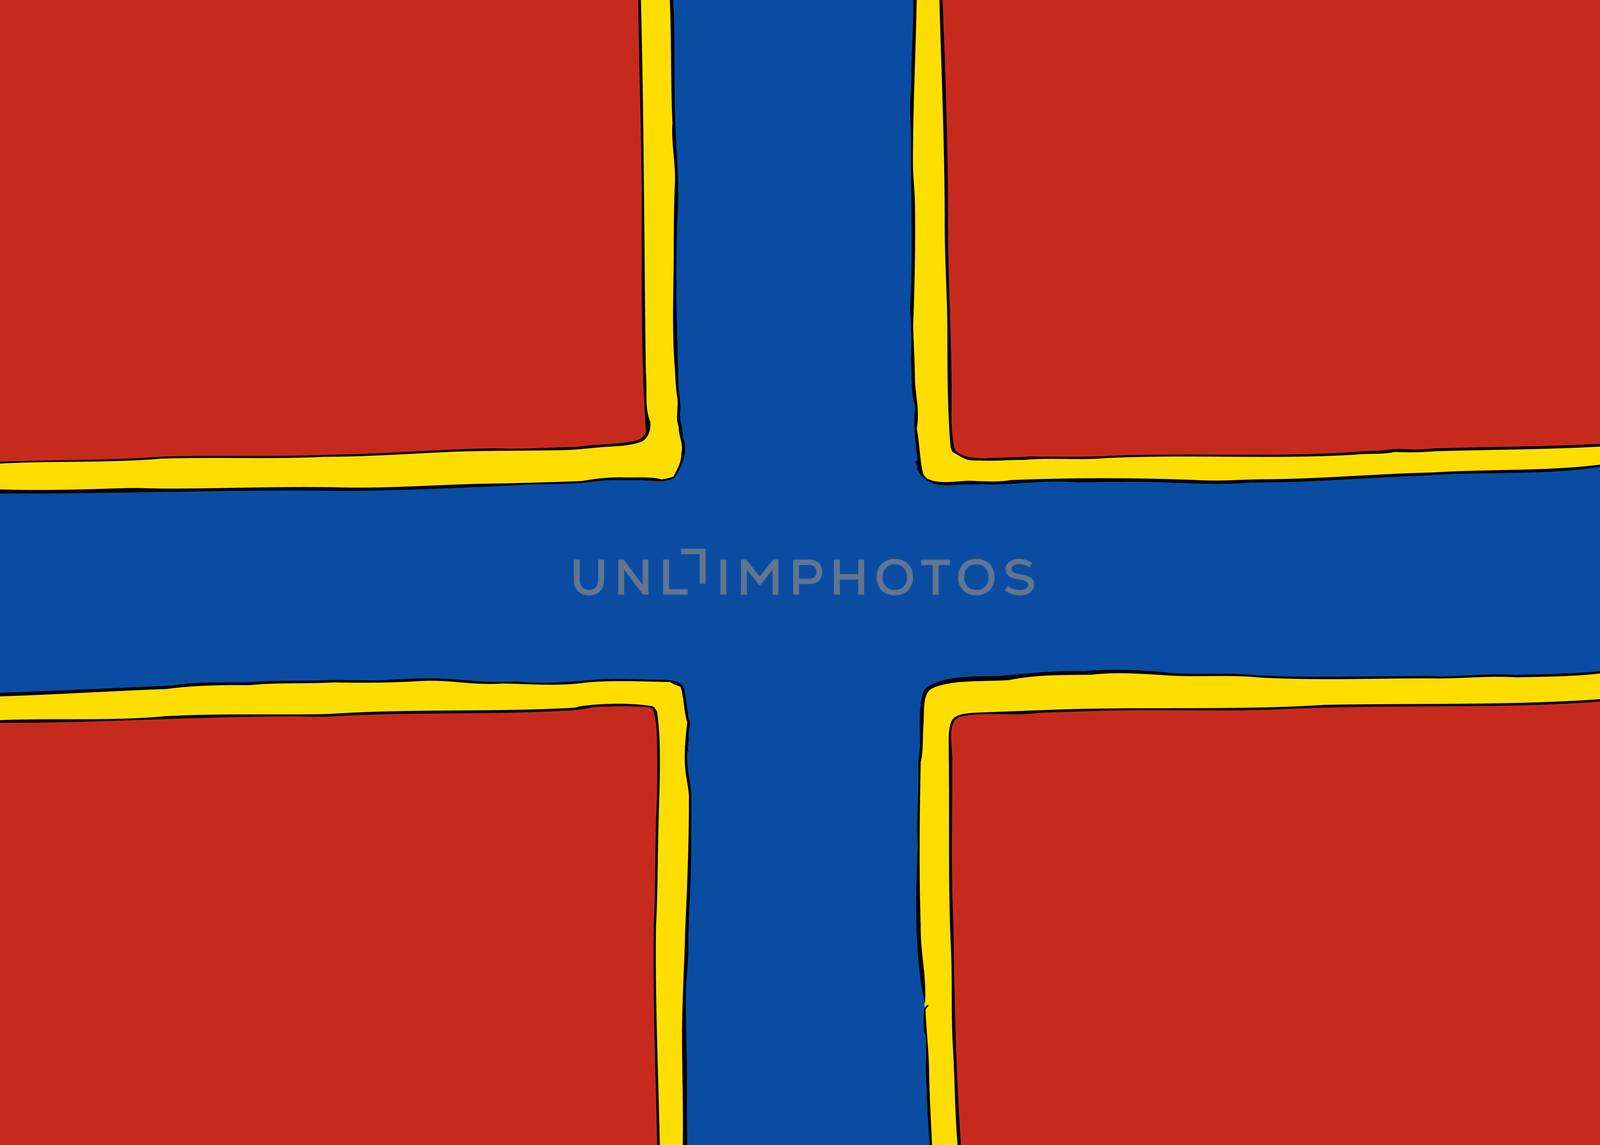 Symmetrical centered version of a Nordic Cross flag representing the Orkney Islands